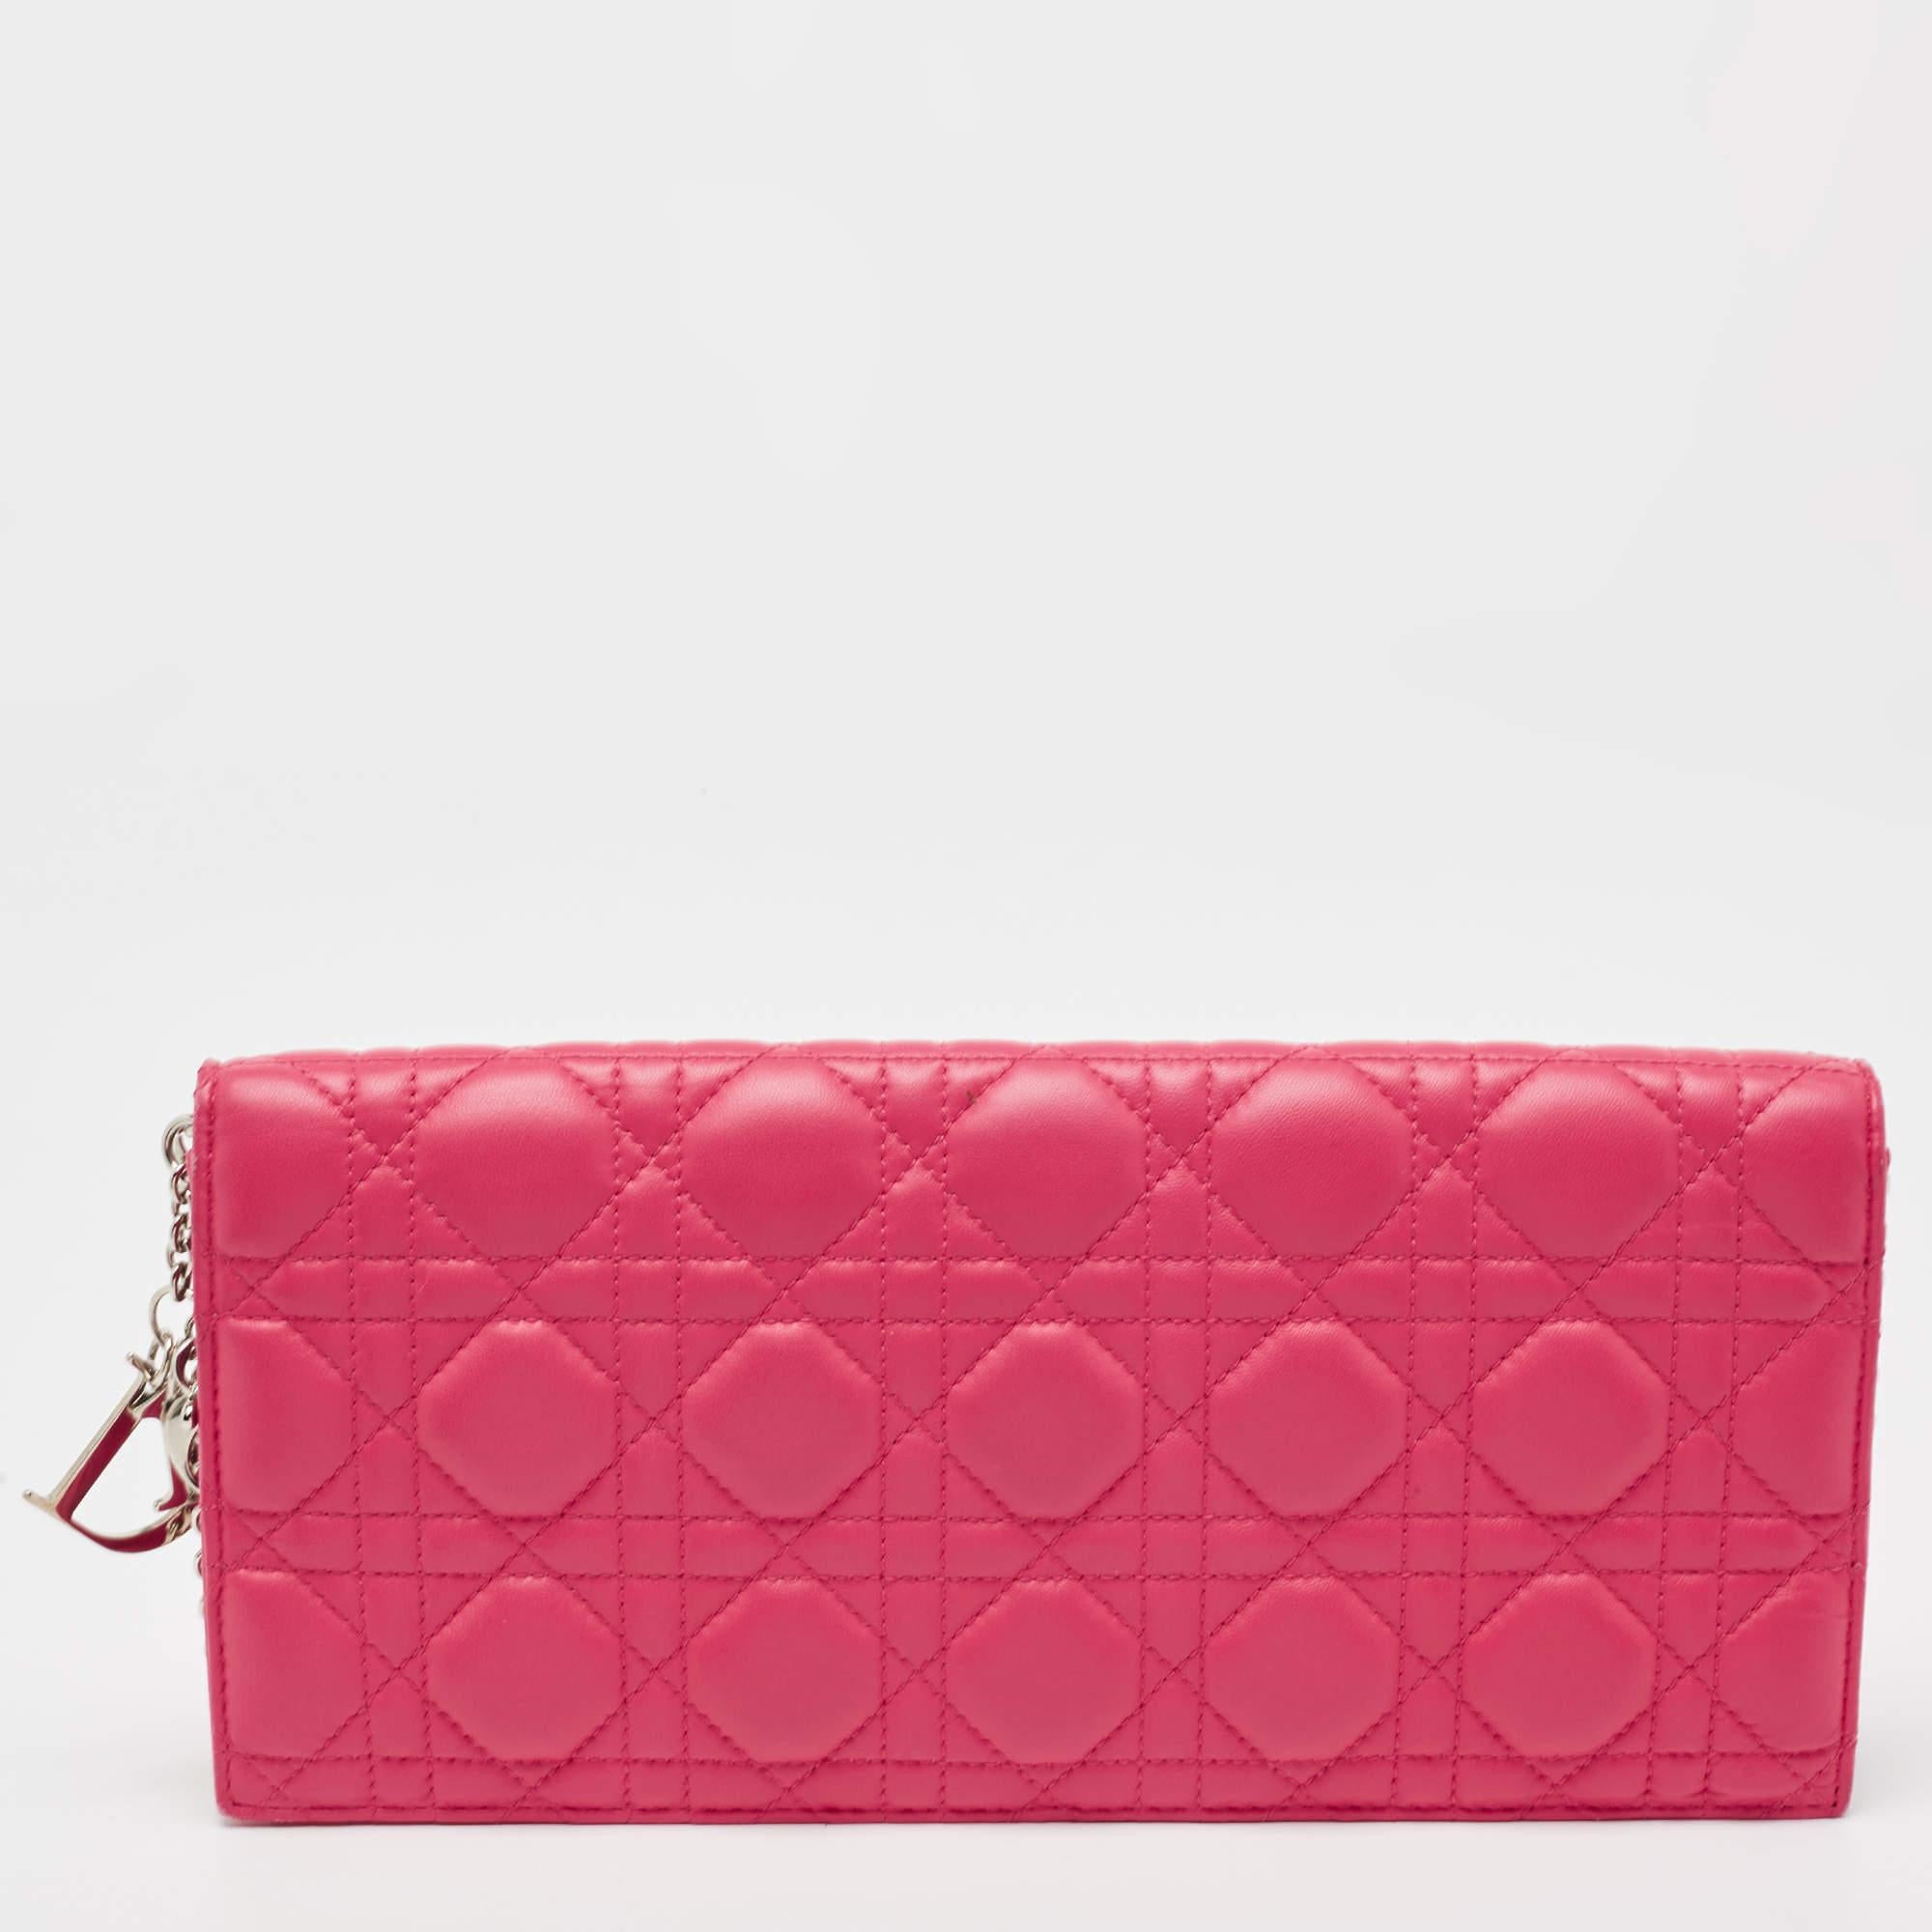 This Lady Dior pouch is designed for frequent use. Crafted from pink leather, the exterior has the Cannage quilt and flap closure. The fabric-lined interior houses a slip pocket.

Includes: Original Dustbag, Detachable Chain Strap

